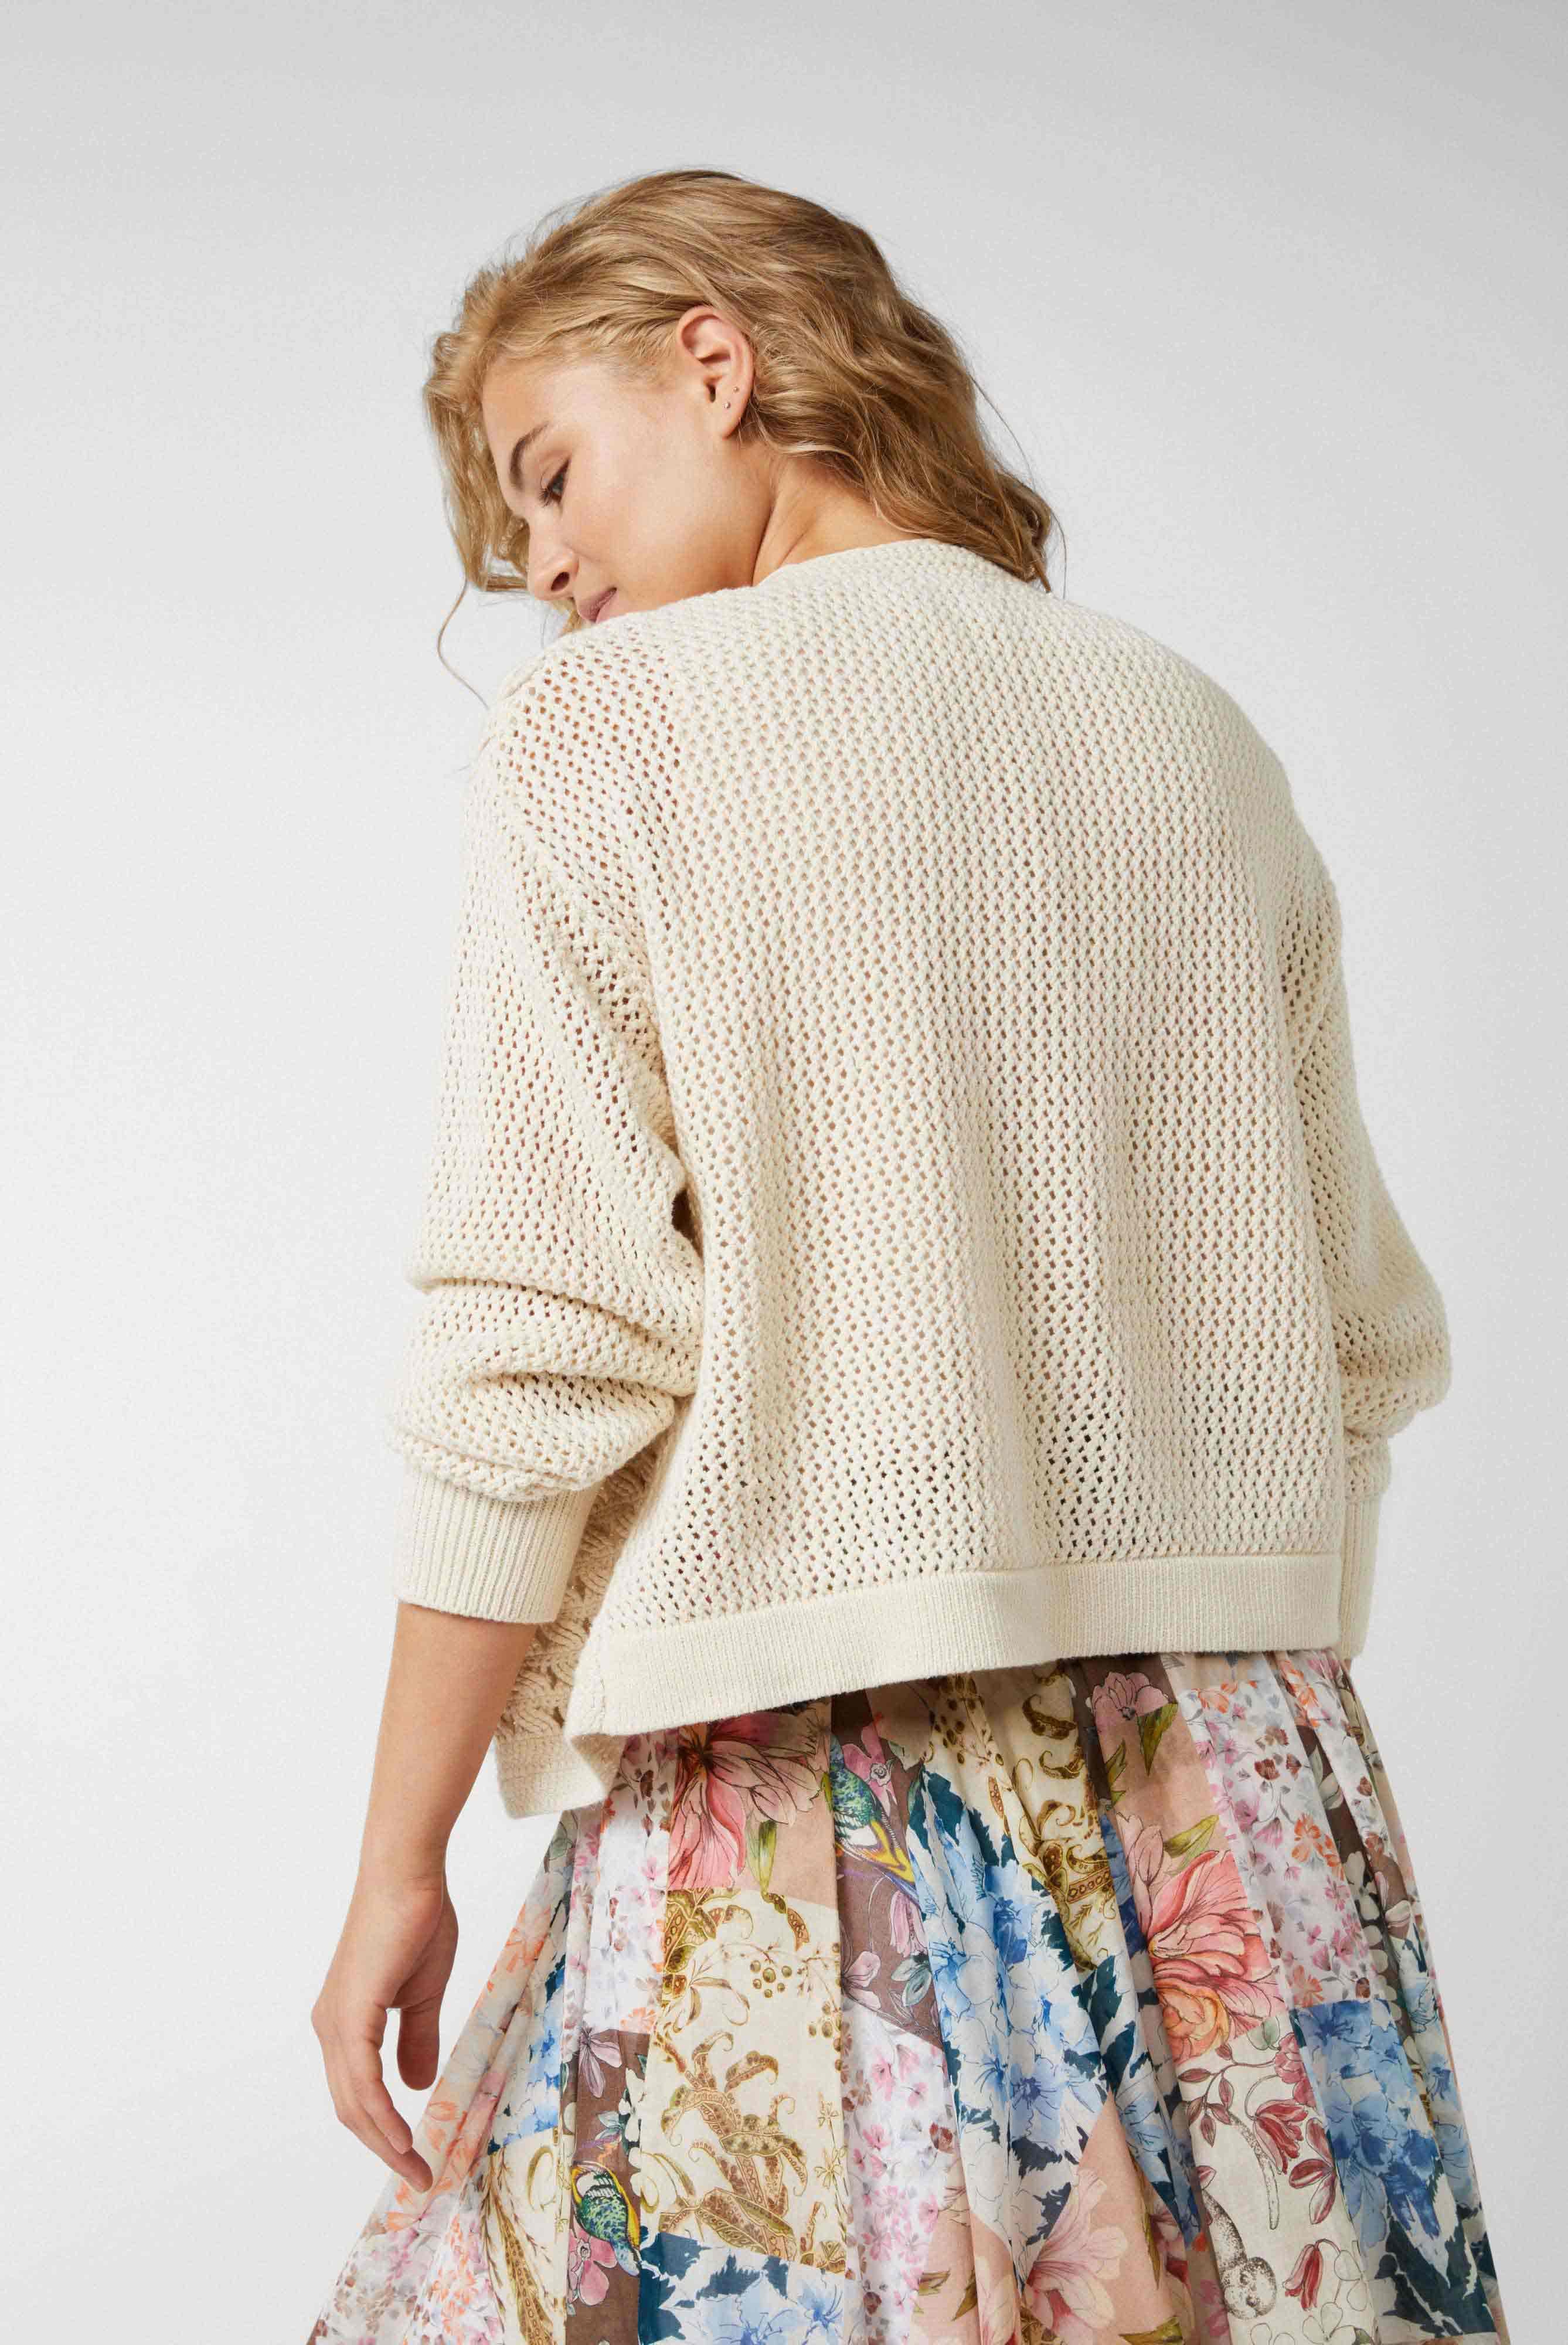 Sweaters & Cardigans+Hand-knitted crochet cardigan with long sleeves and a relaxed fit made from beige organic cotton+09.9931..S00200.120.XS